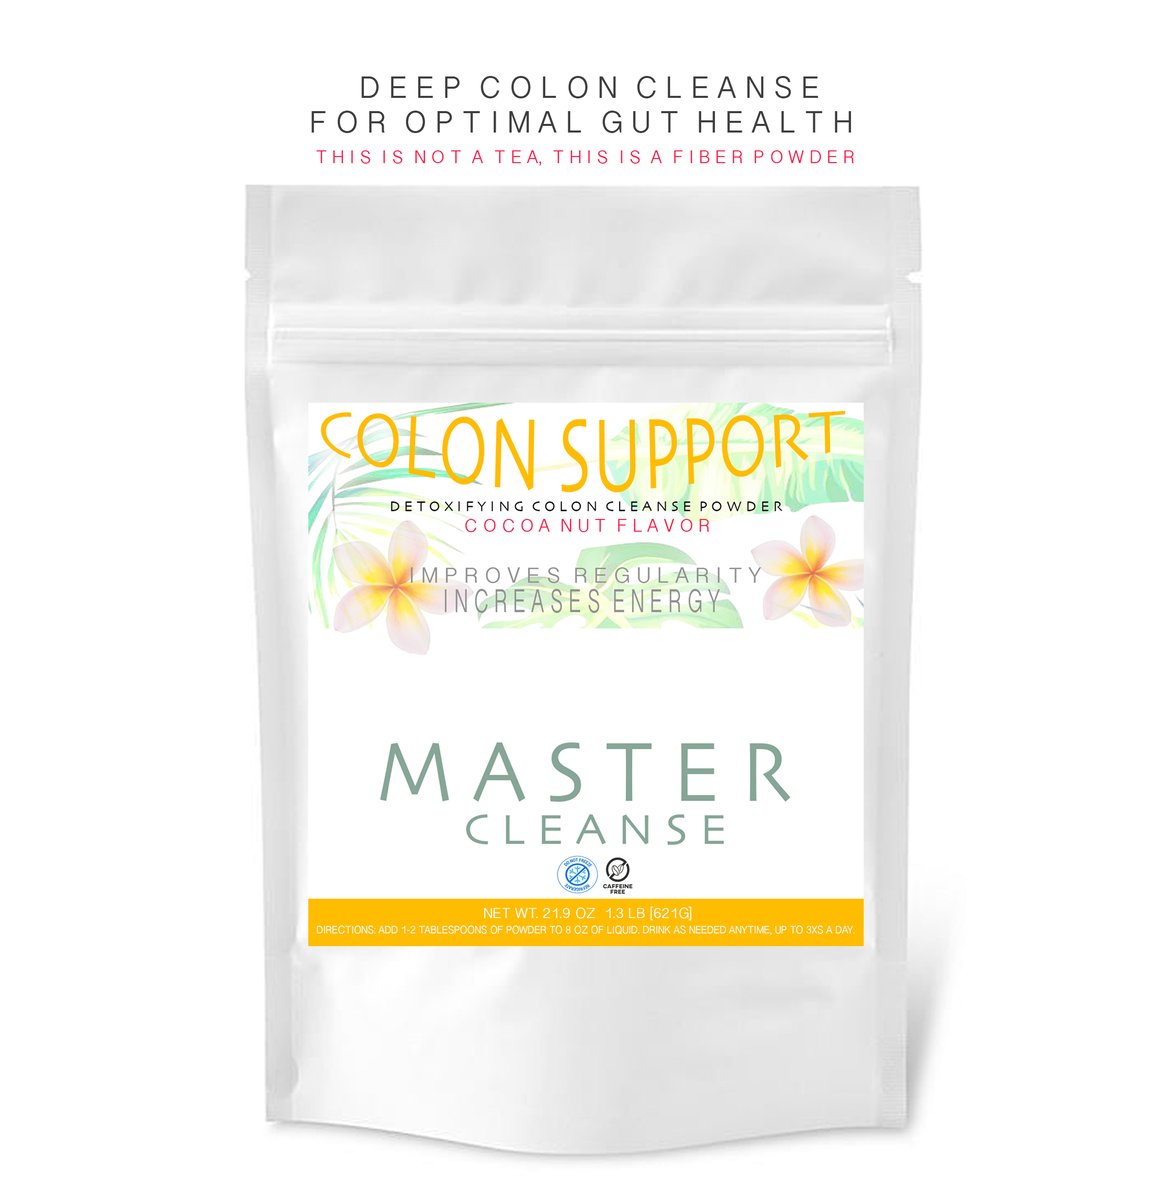 Master Cleanse Smaller Sizes | This Fits Me